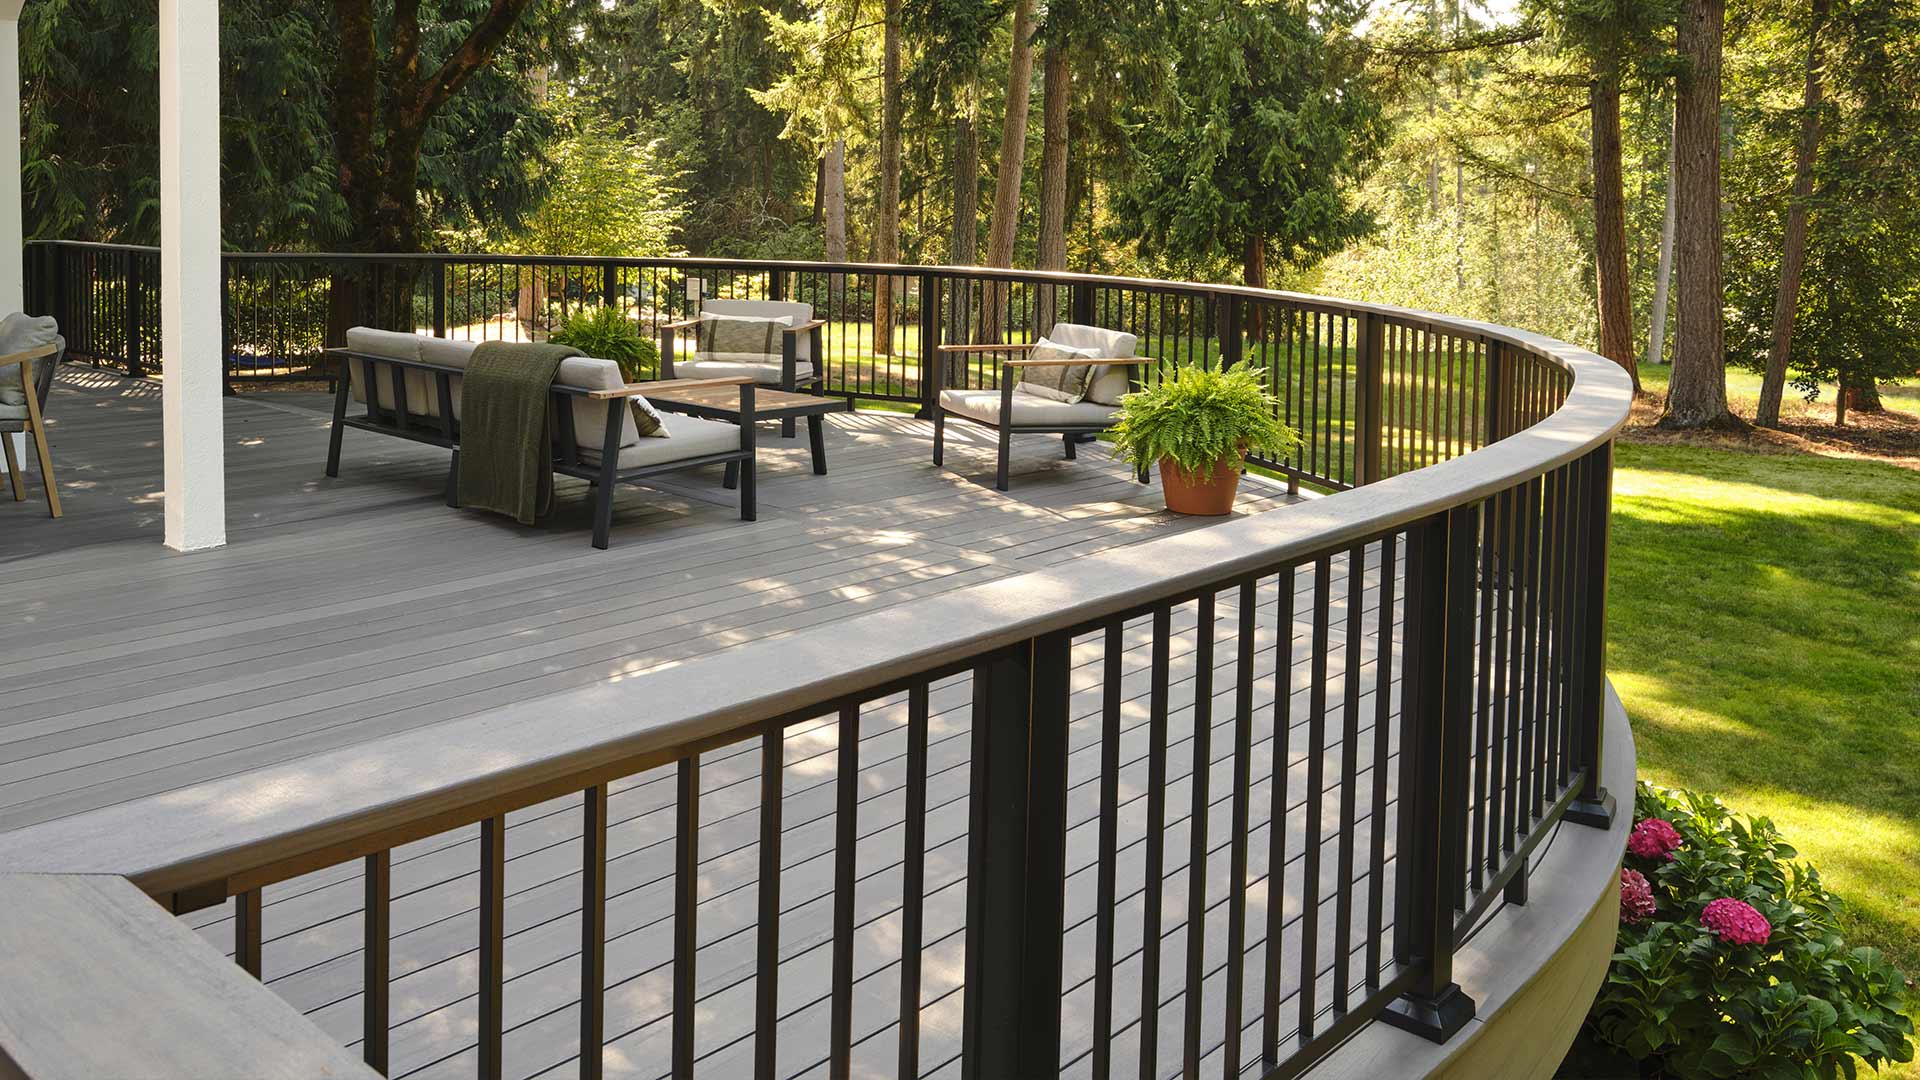 Curved deck with numerous outdoor chairs surrounded by trees